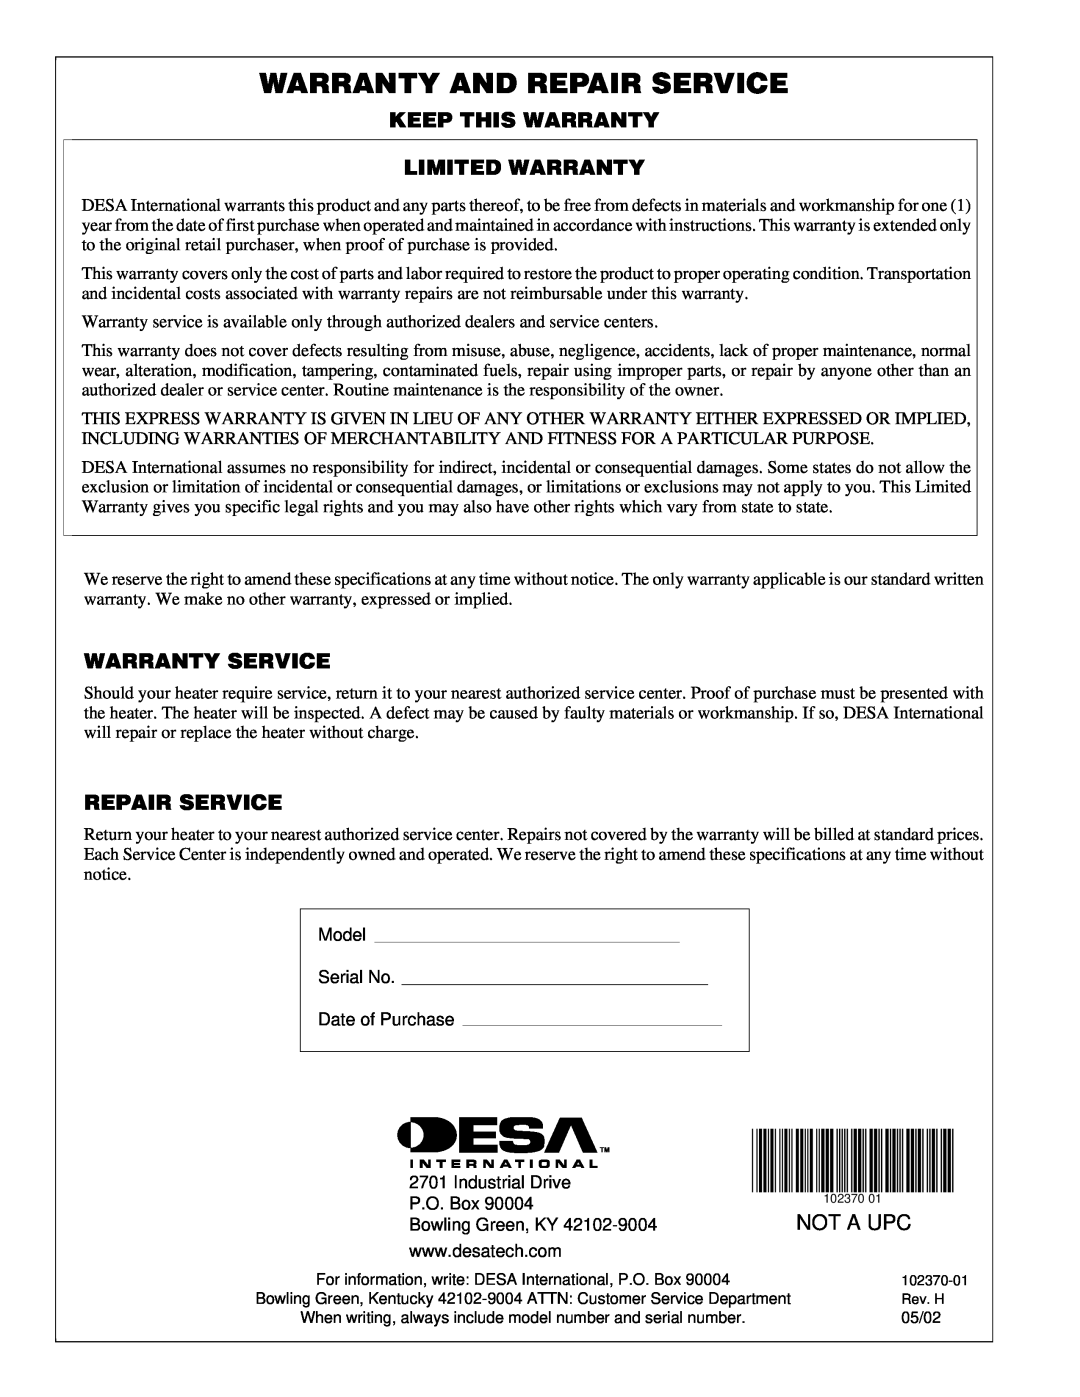 Desa PROPANE CONSTRUCTION HEATERS owner manual Warranty And Repair Service, Not A Upc, Keep This Warranty Limited Warranty 